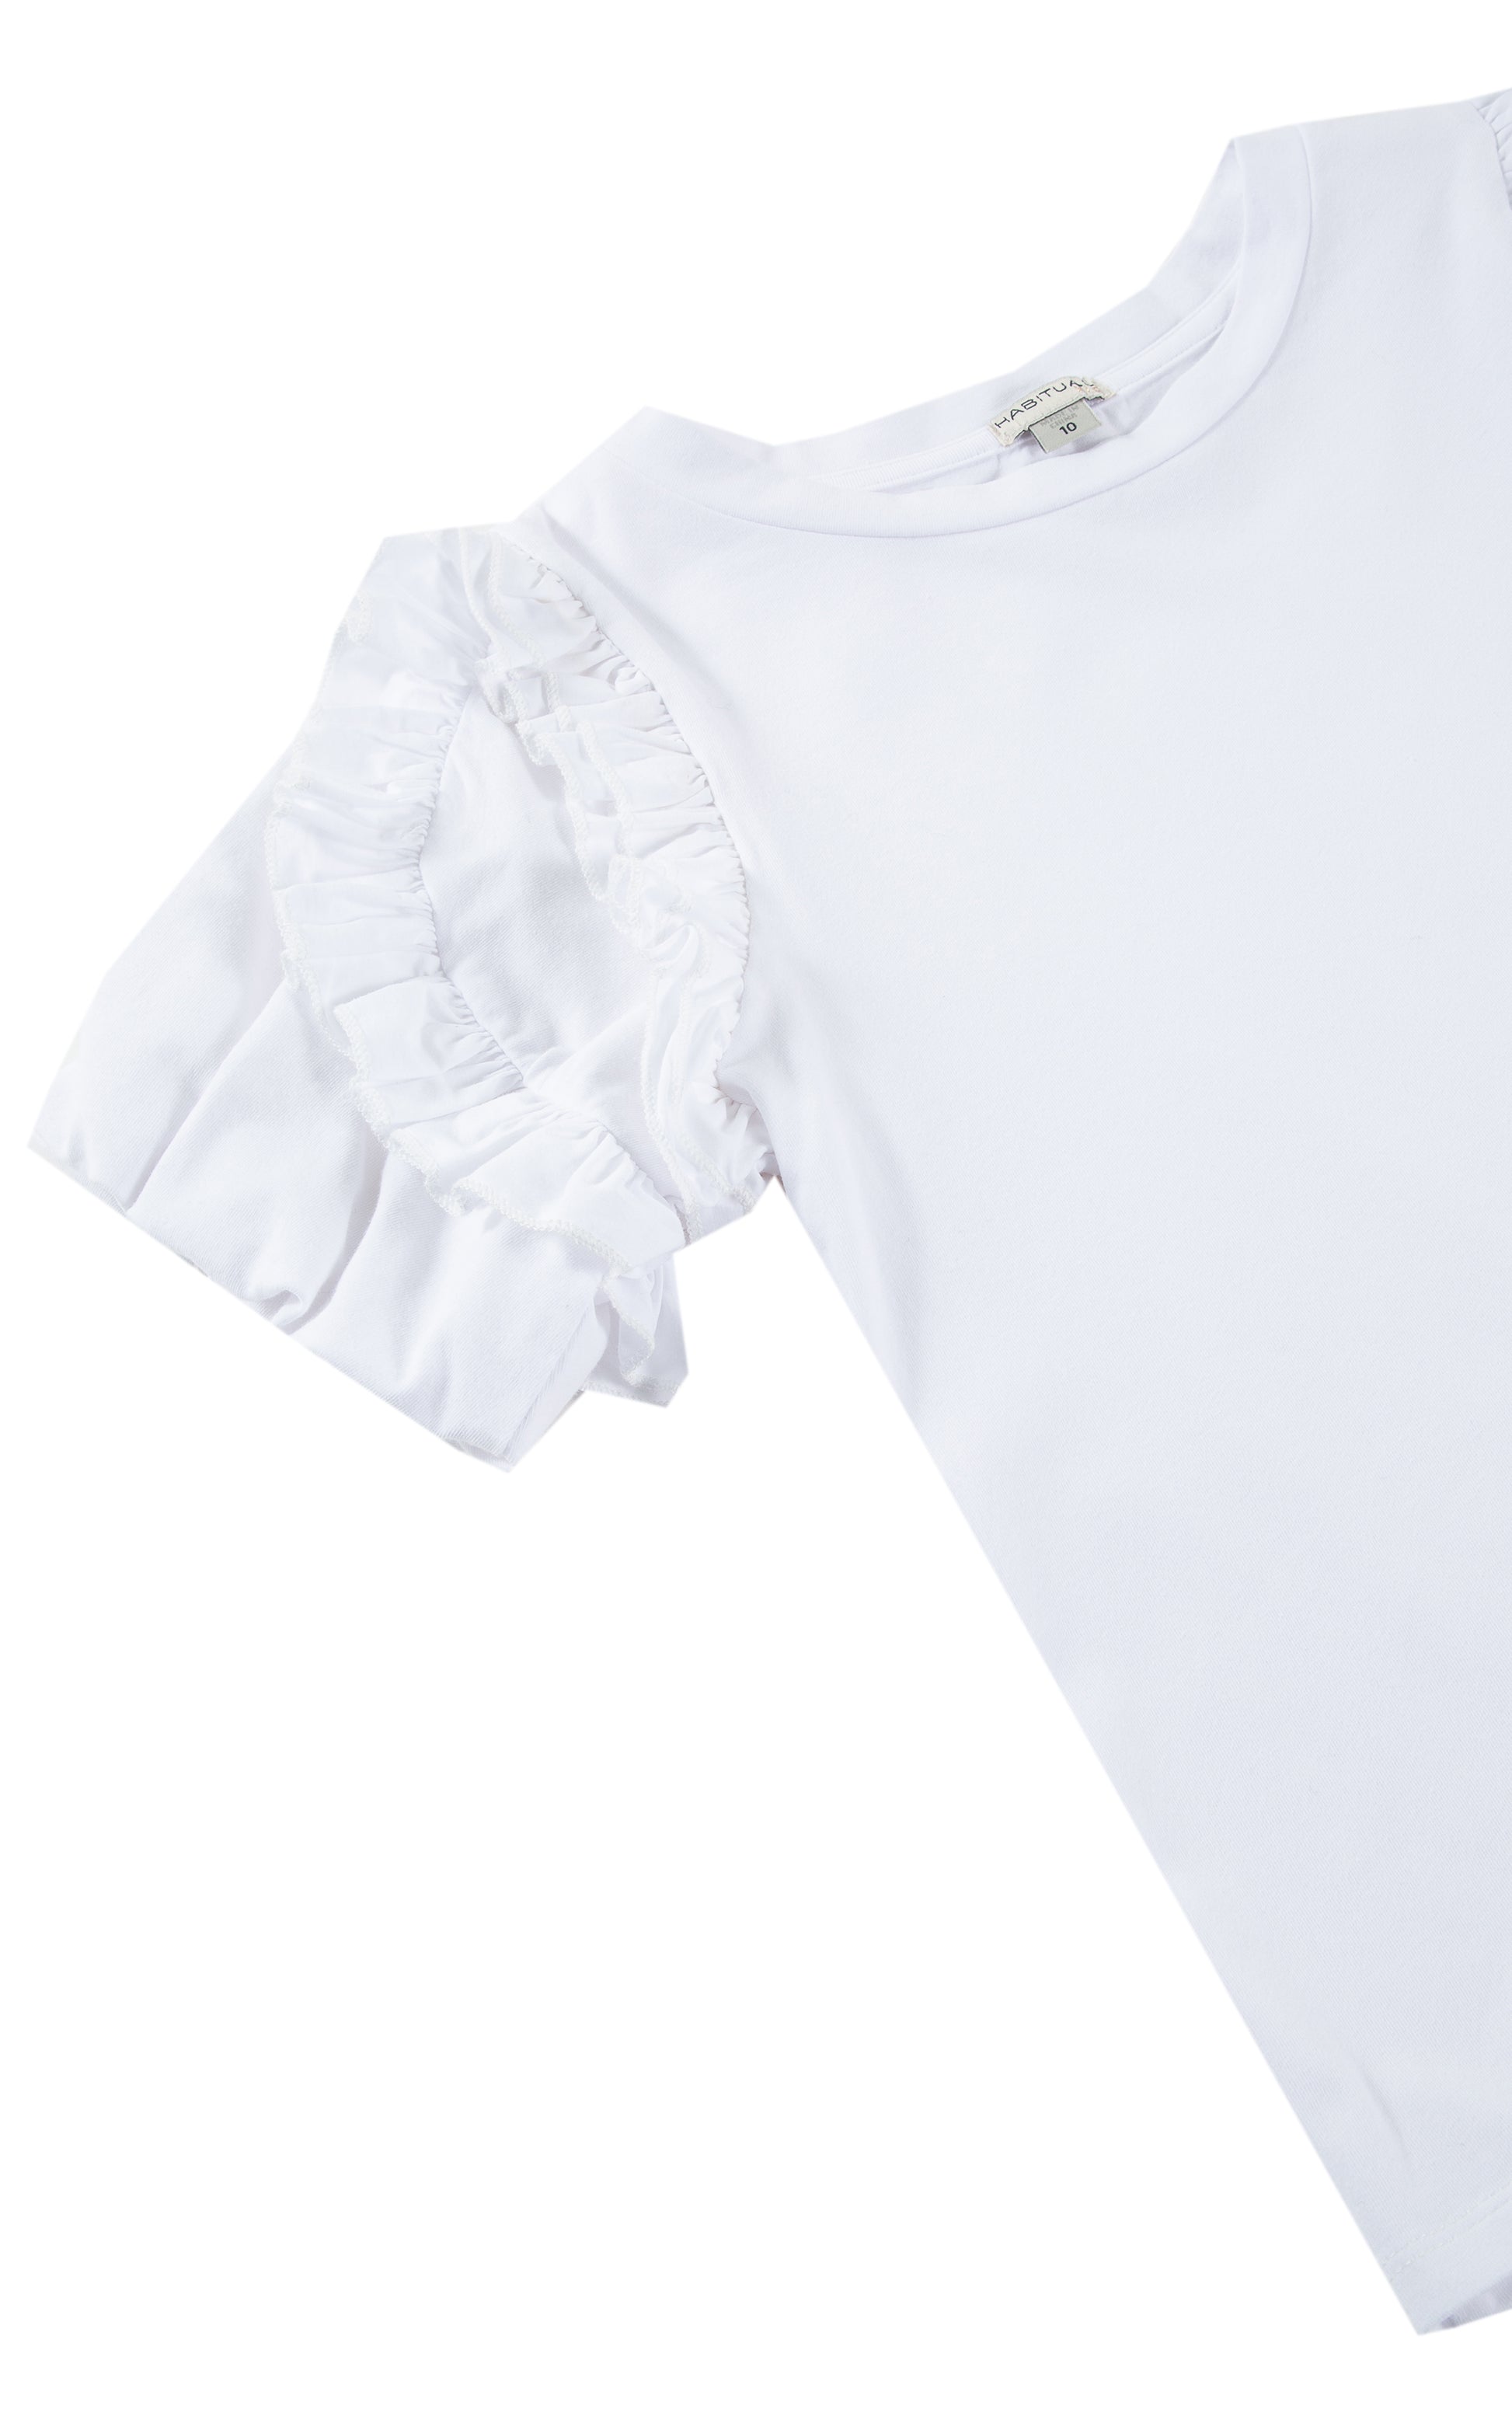 CLOSE UP OF WHITE T-SHIRT WITH PLEATED RUFFLED SLEEVES